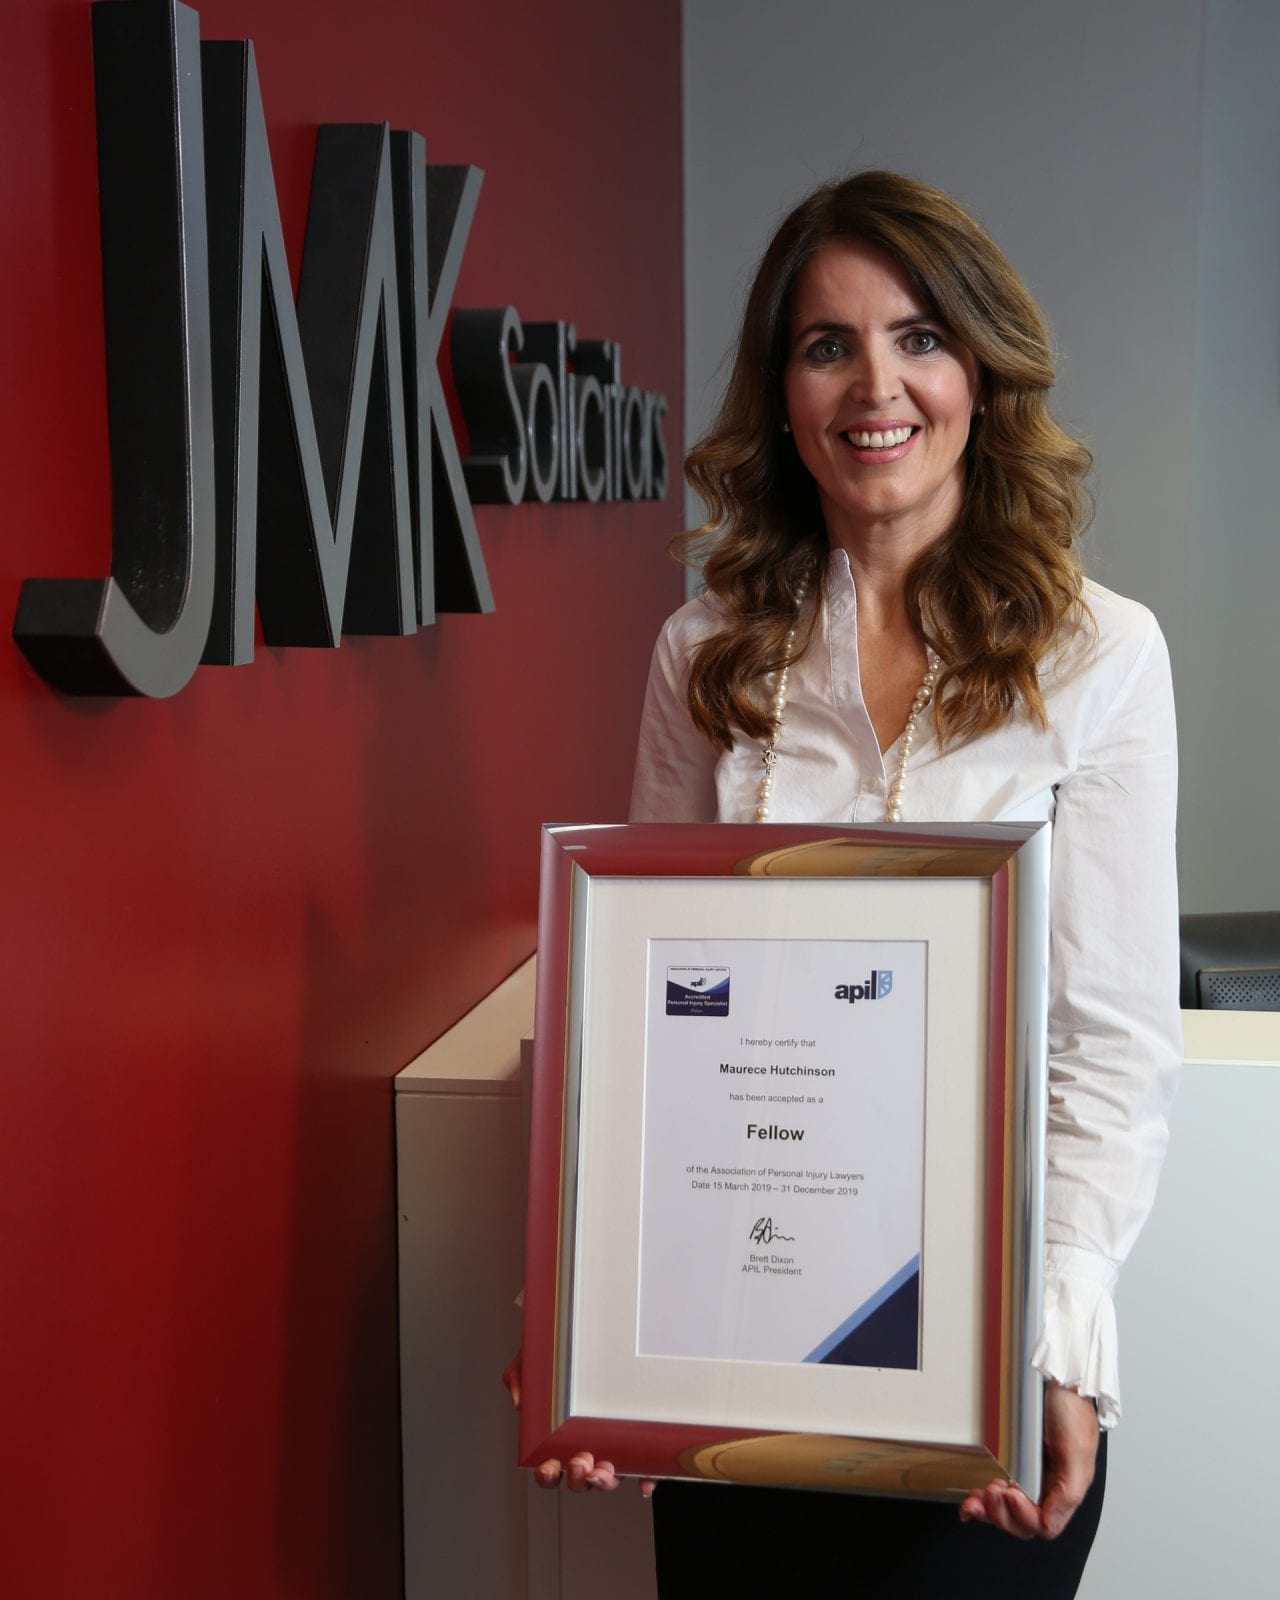 JMK Solicitors Managing Director awarded Industry APIL Fellowship